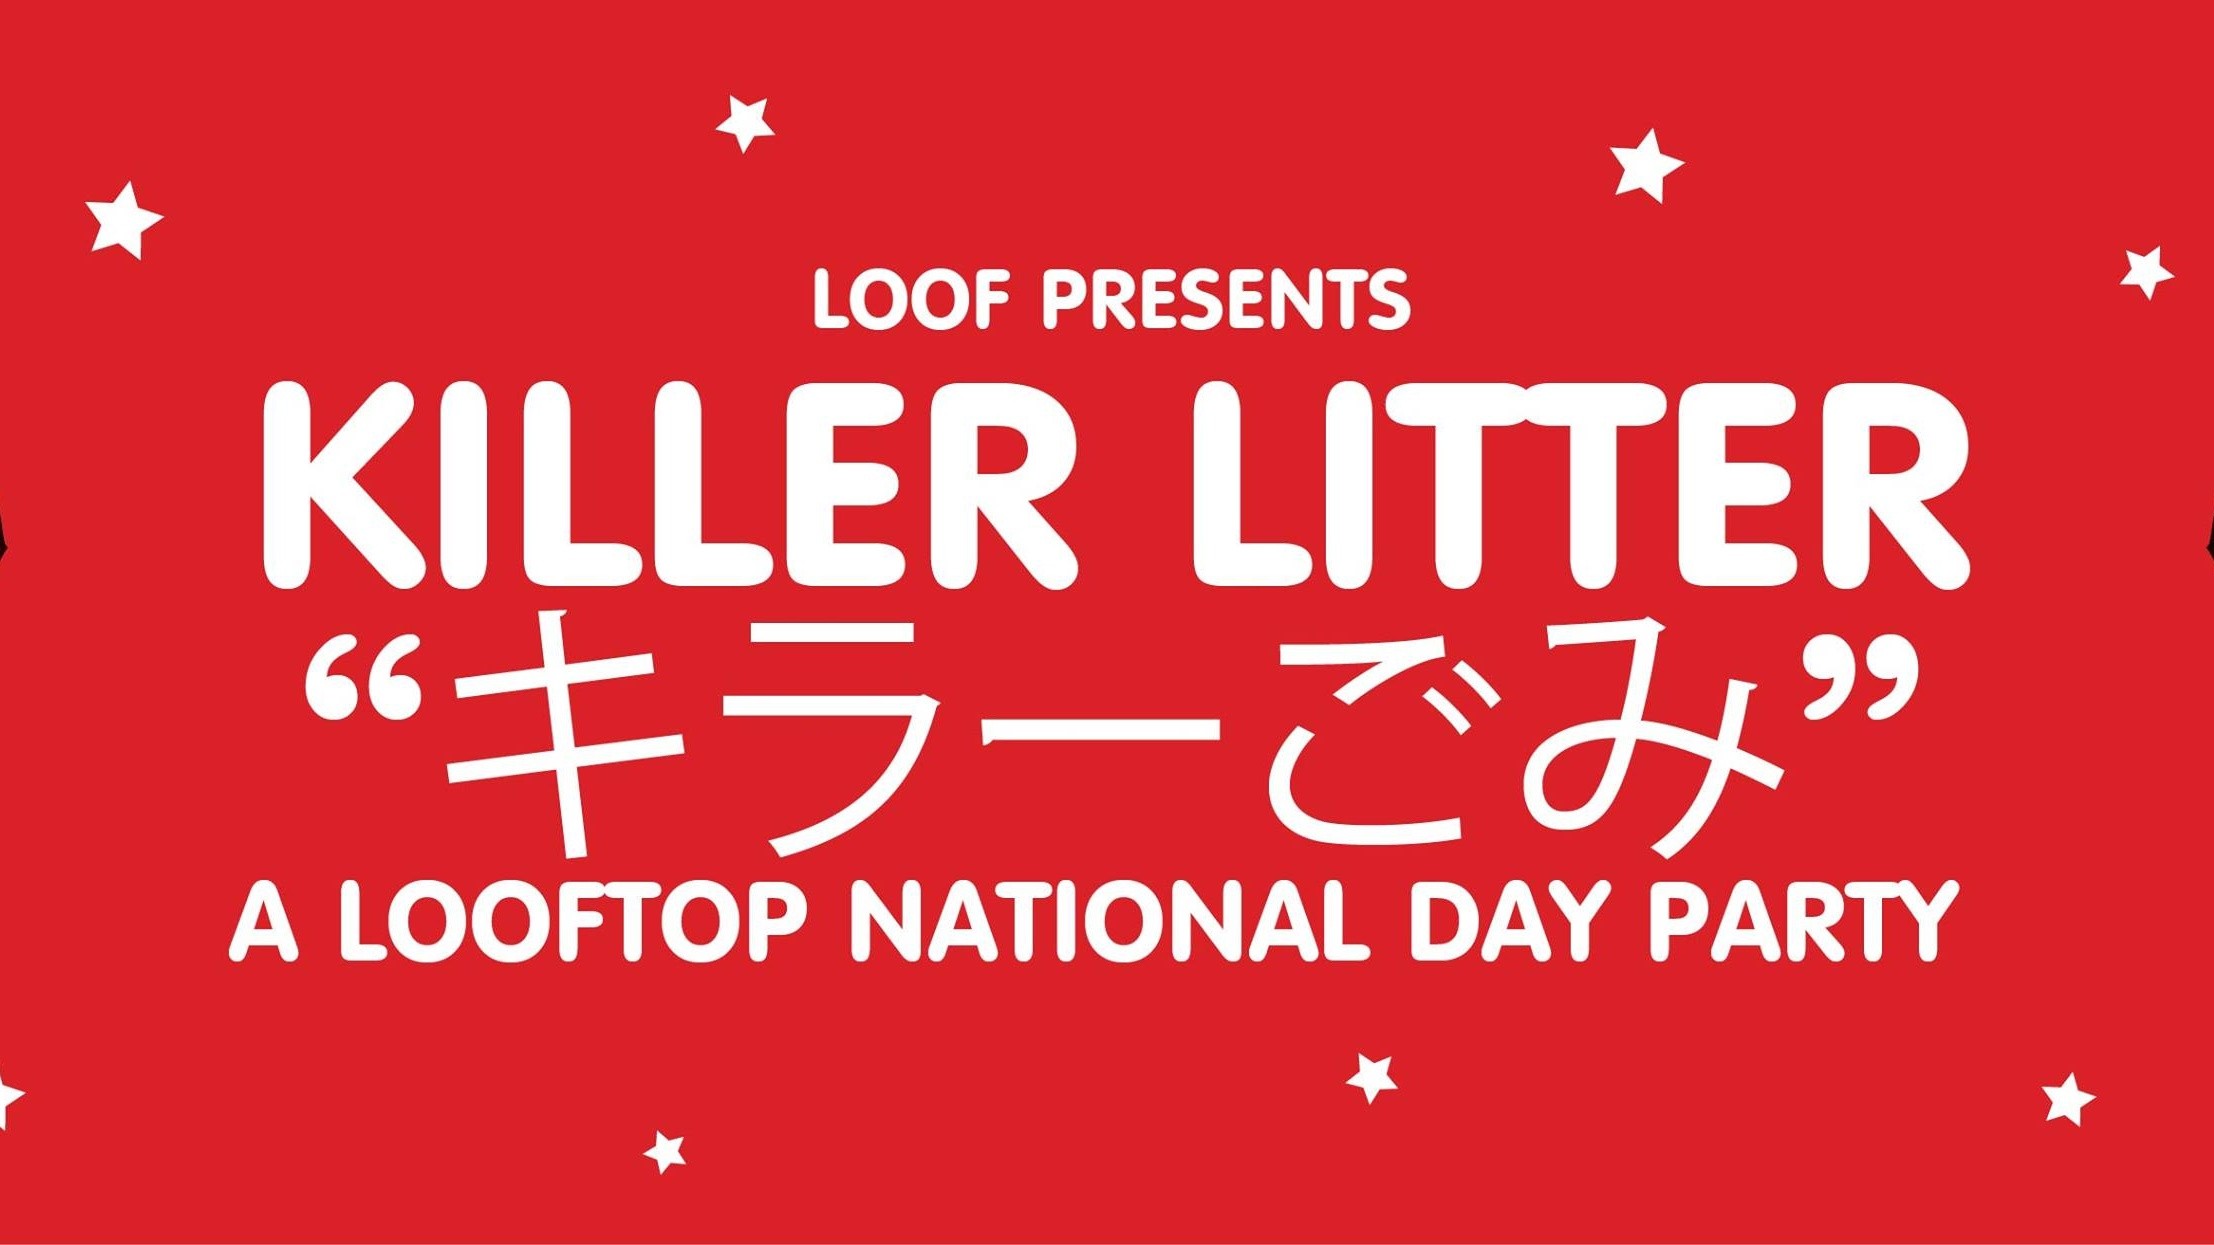 KILLER LITTER ✱ A Looftop National Day Party